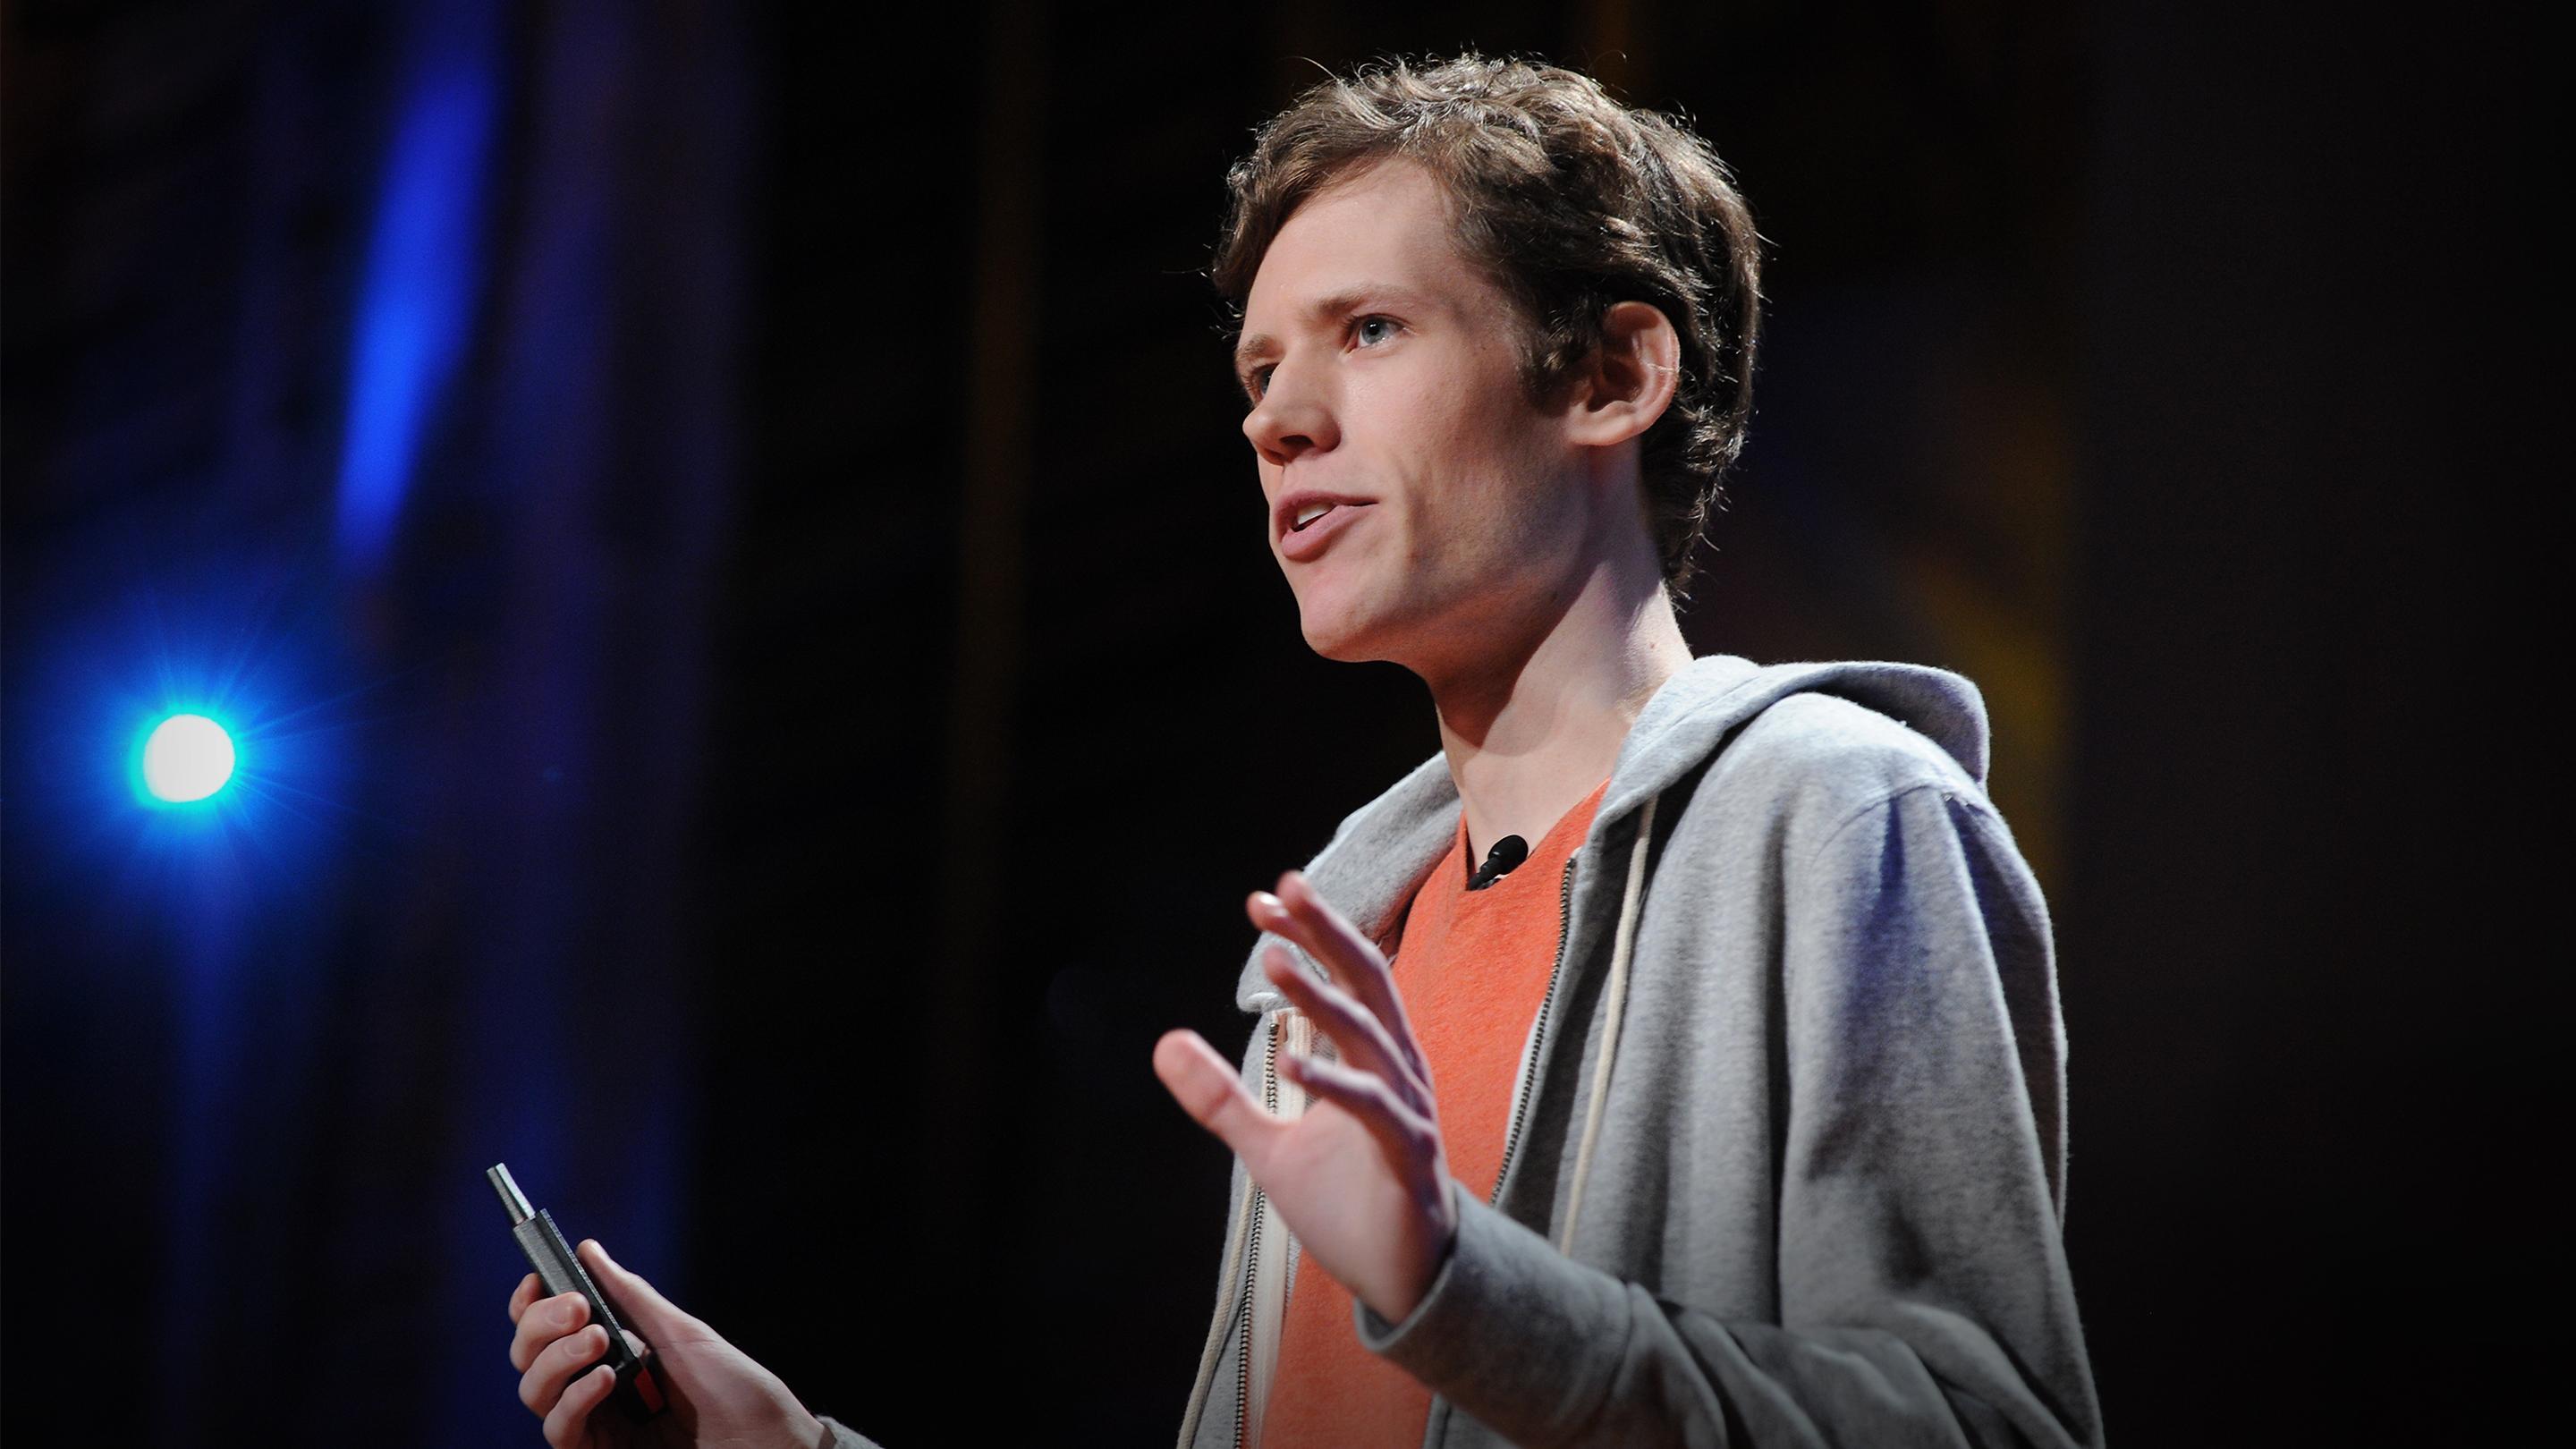 Christopher "moot" Poole: The case for anonymity online | TED Talk